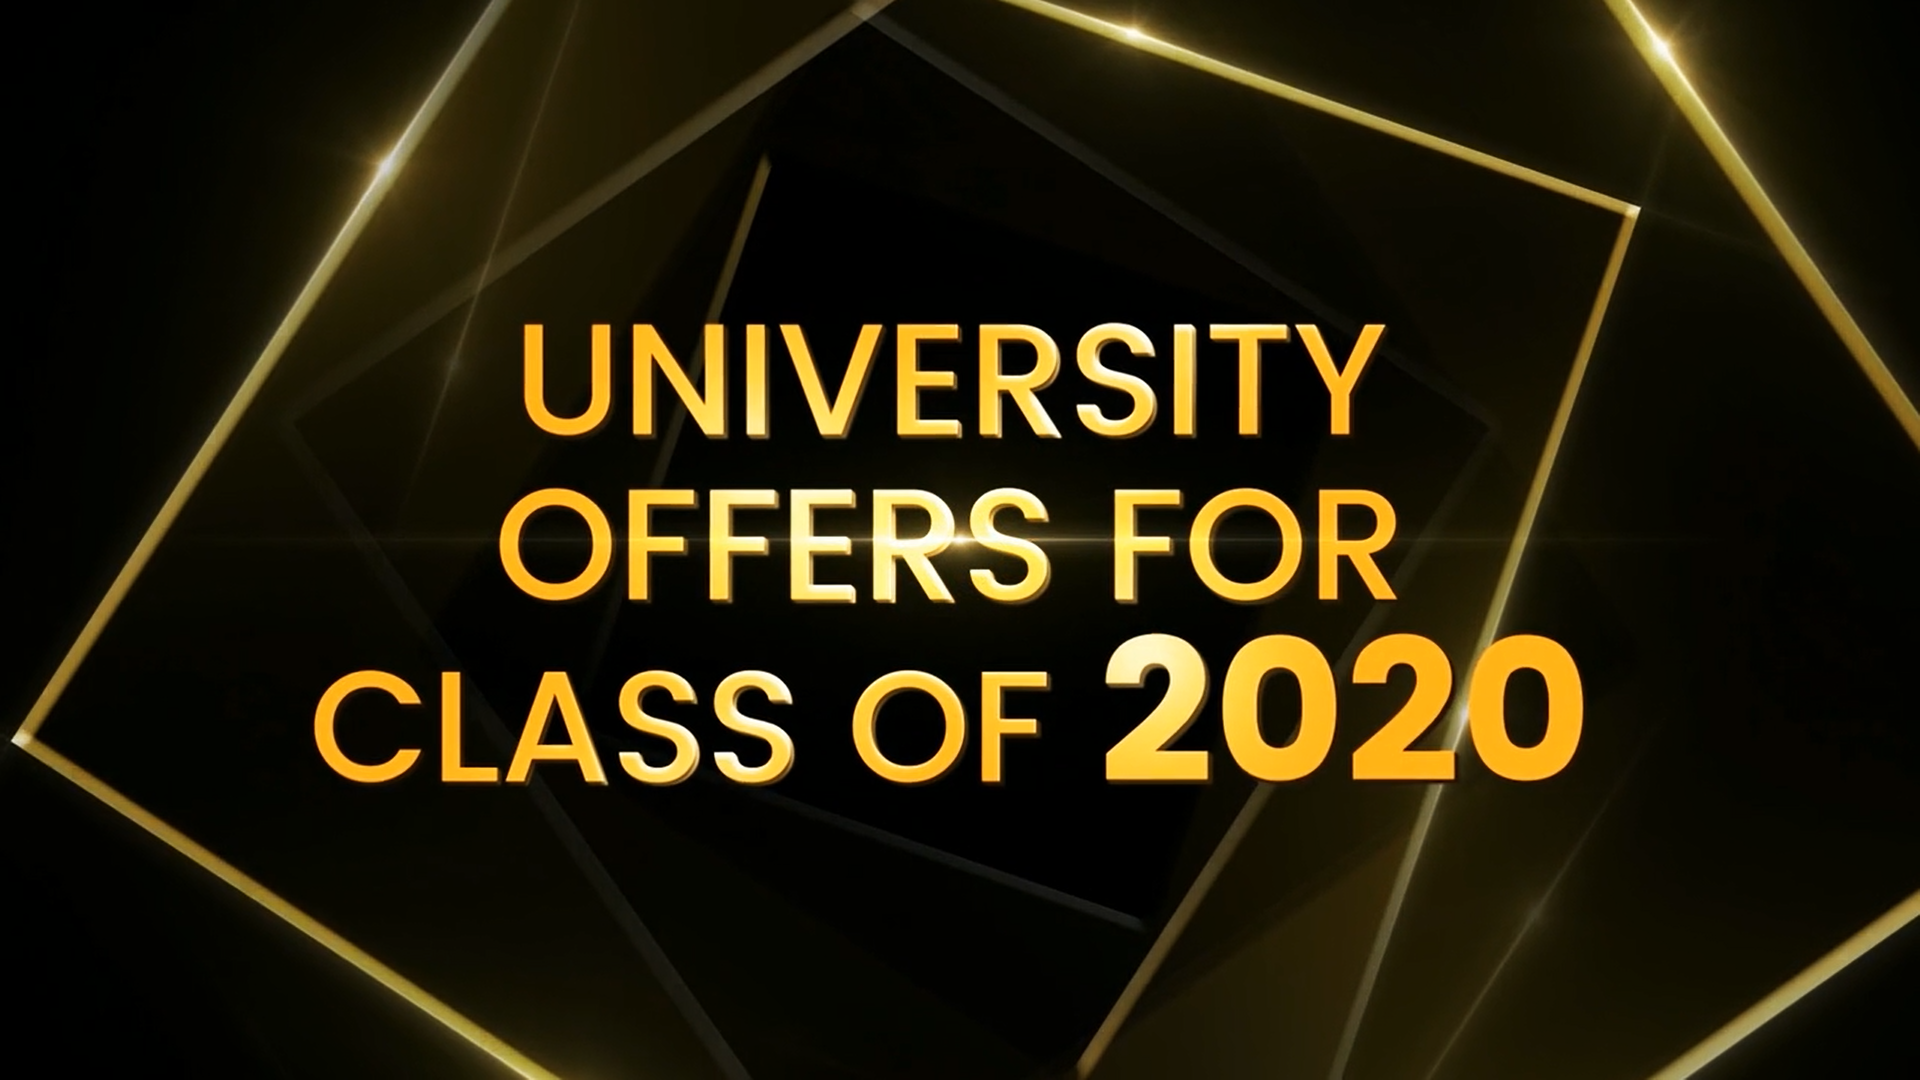 University Offers for Class of 2020